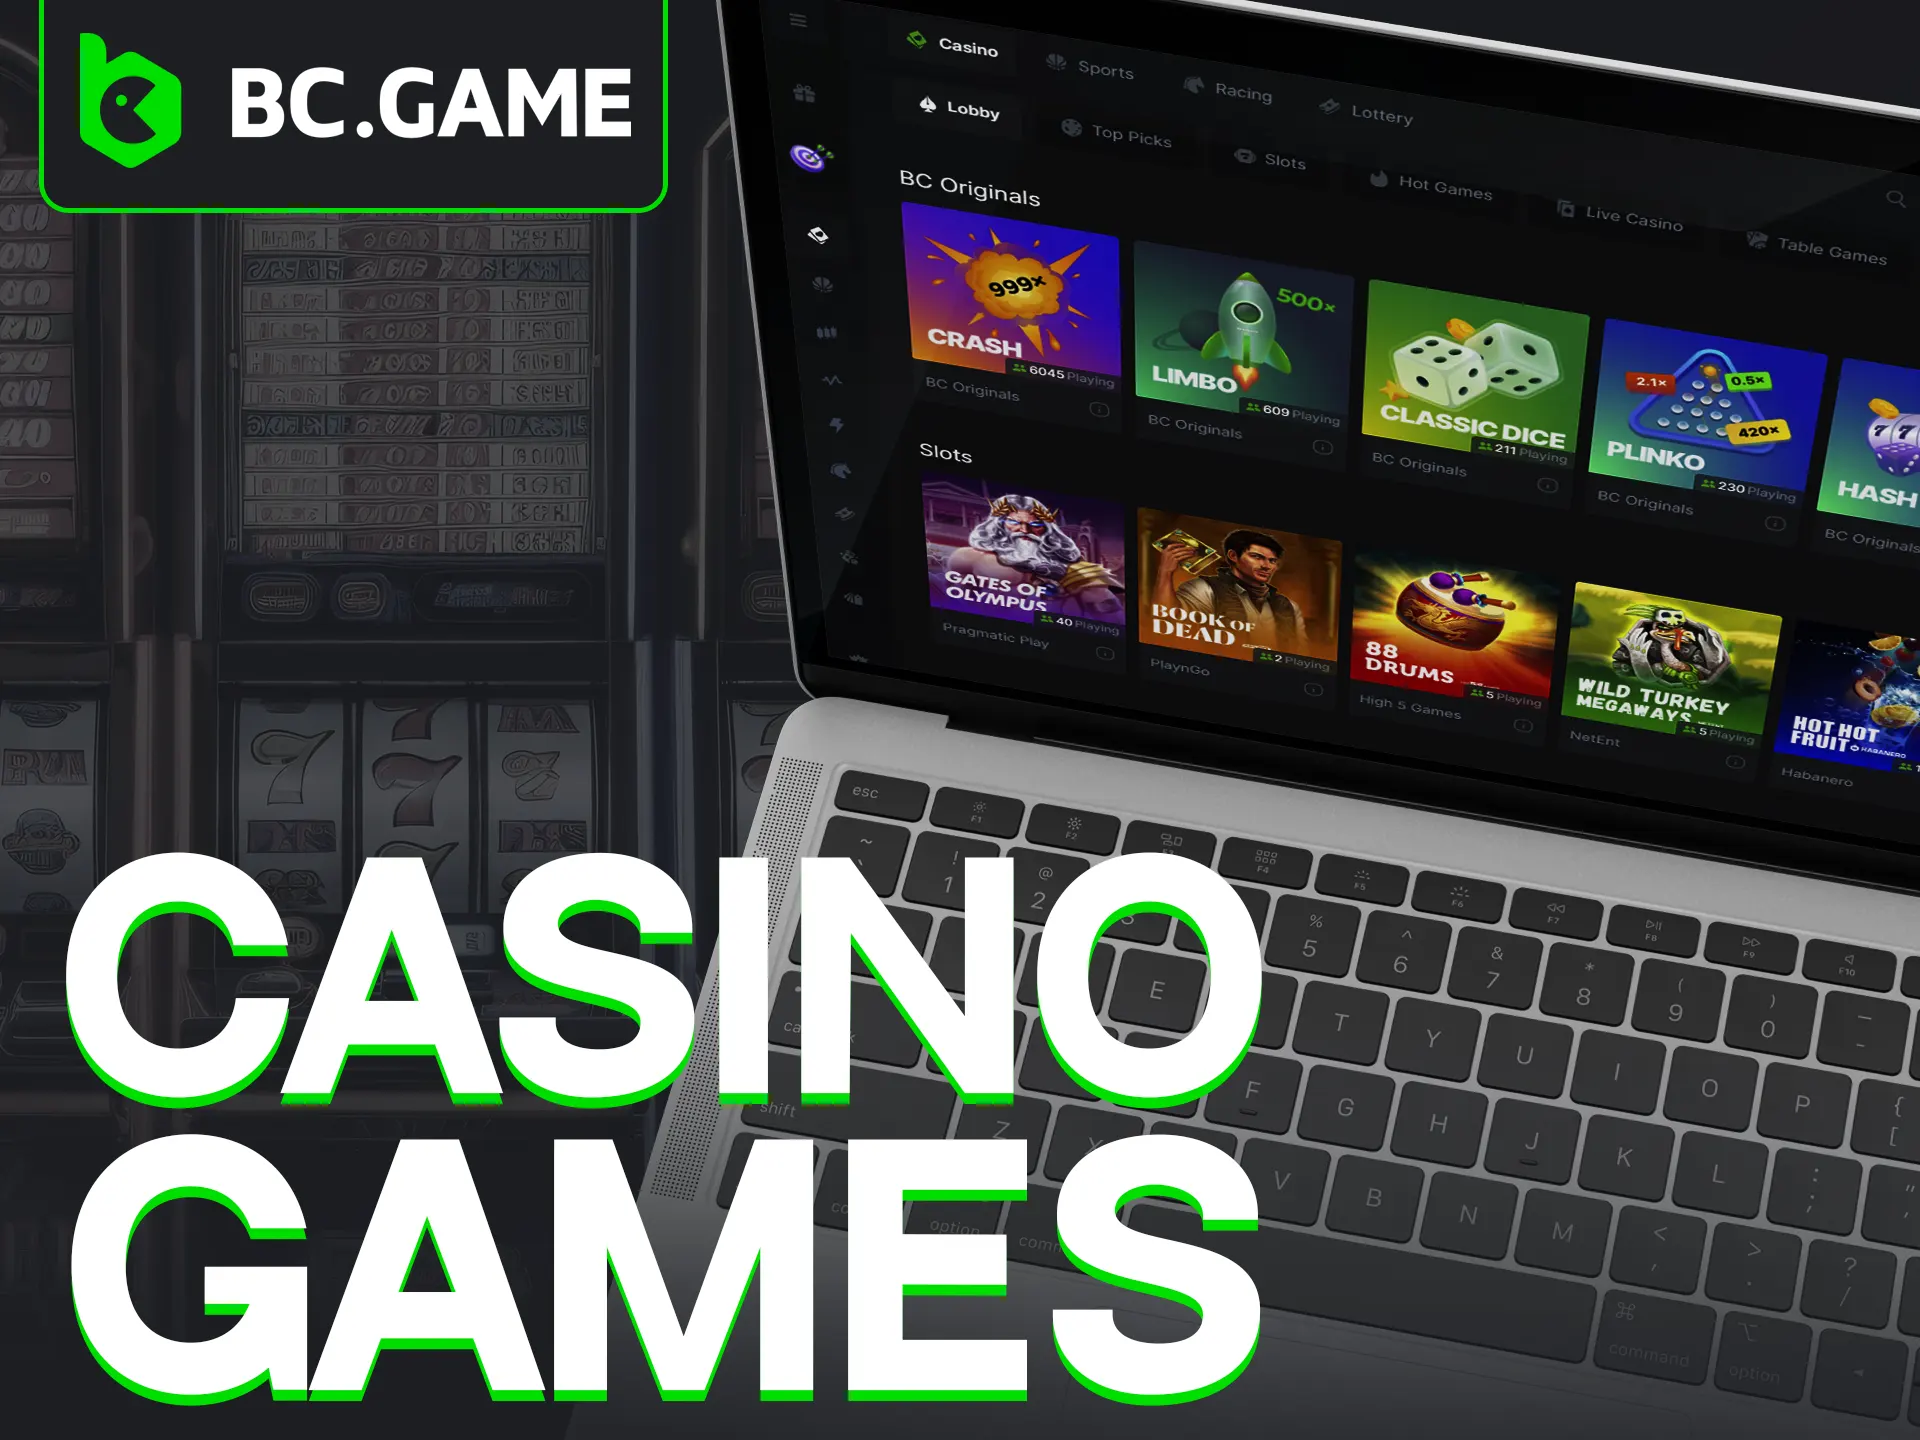 BC Game provides a variety of casino games.